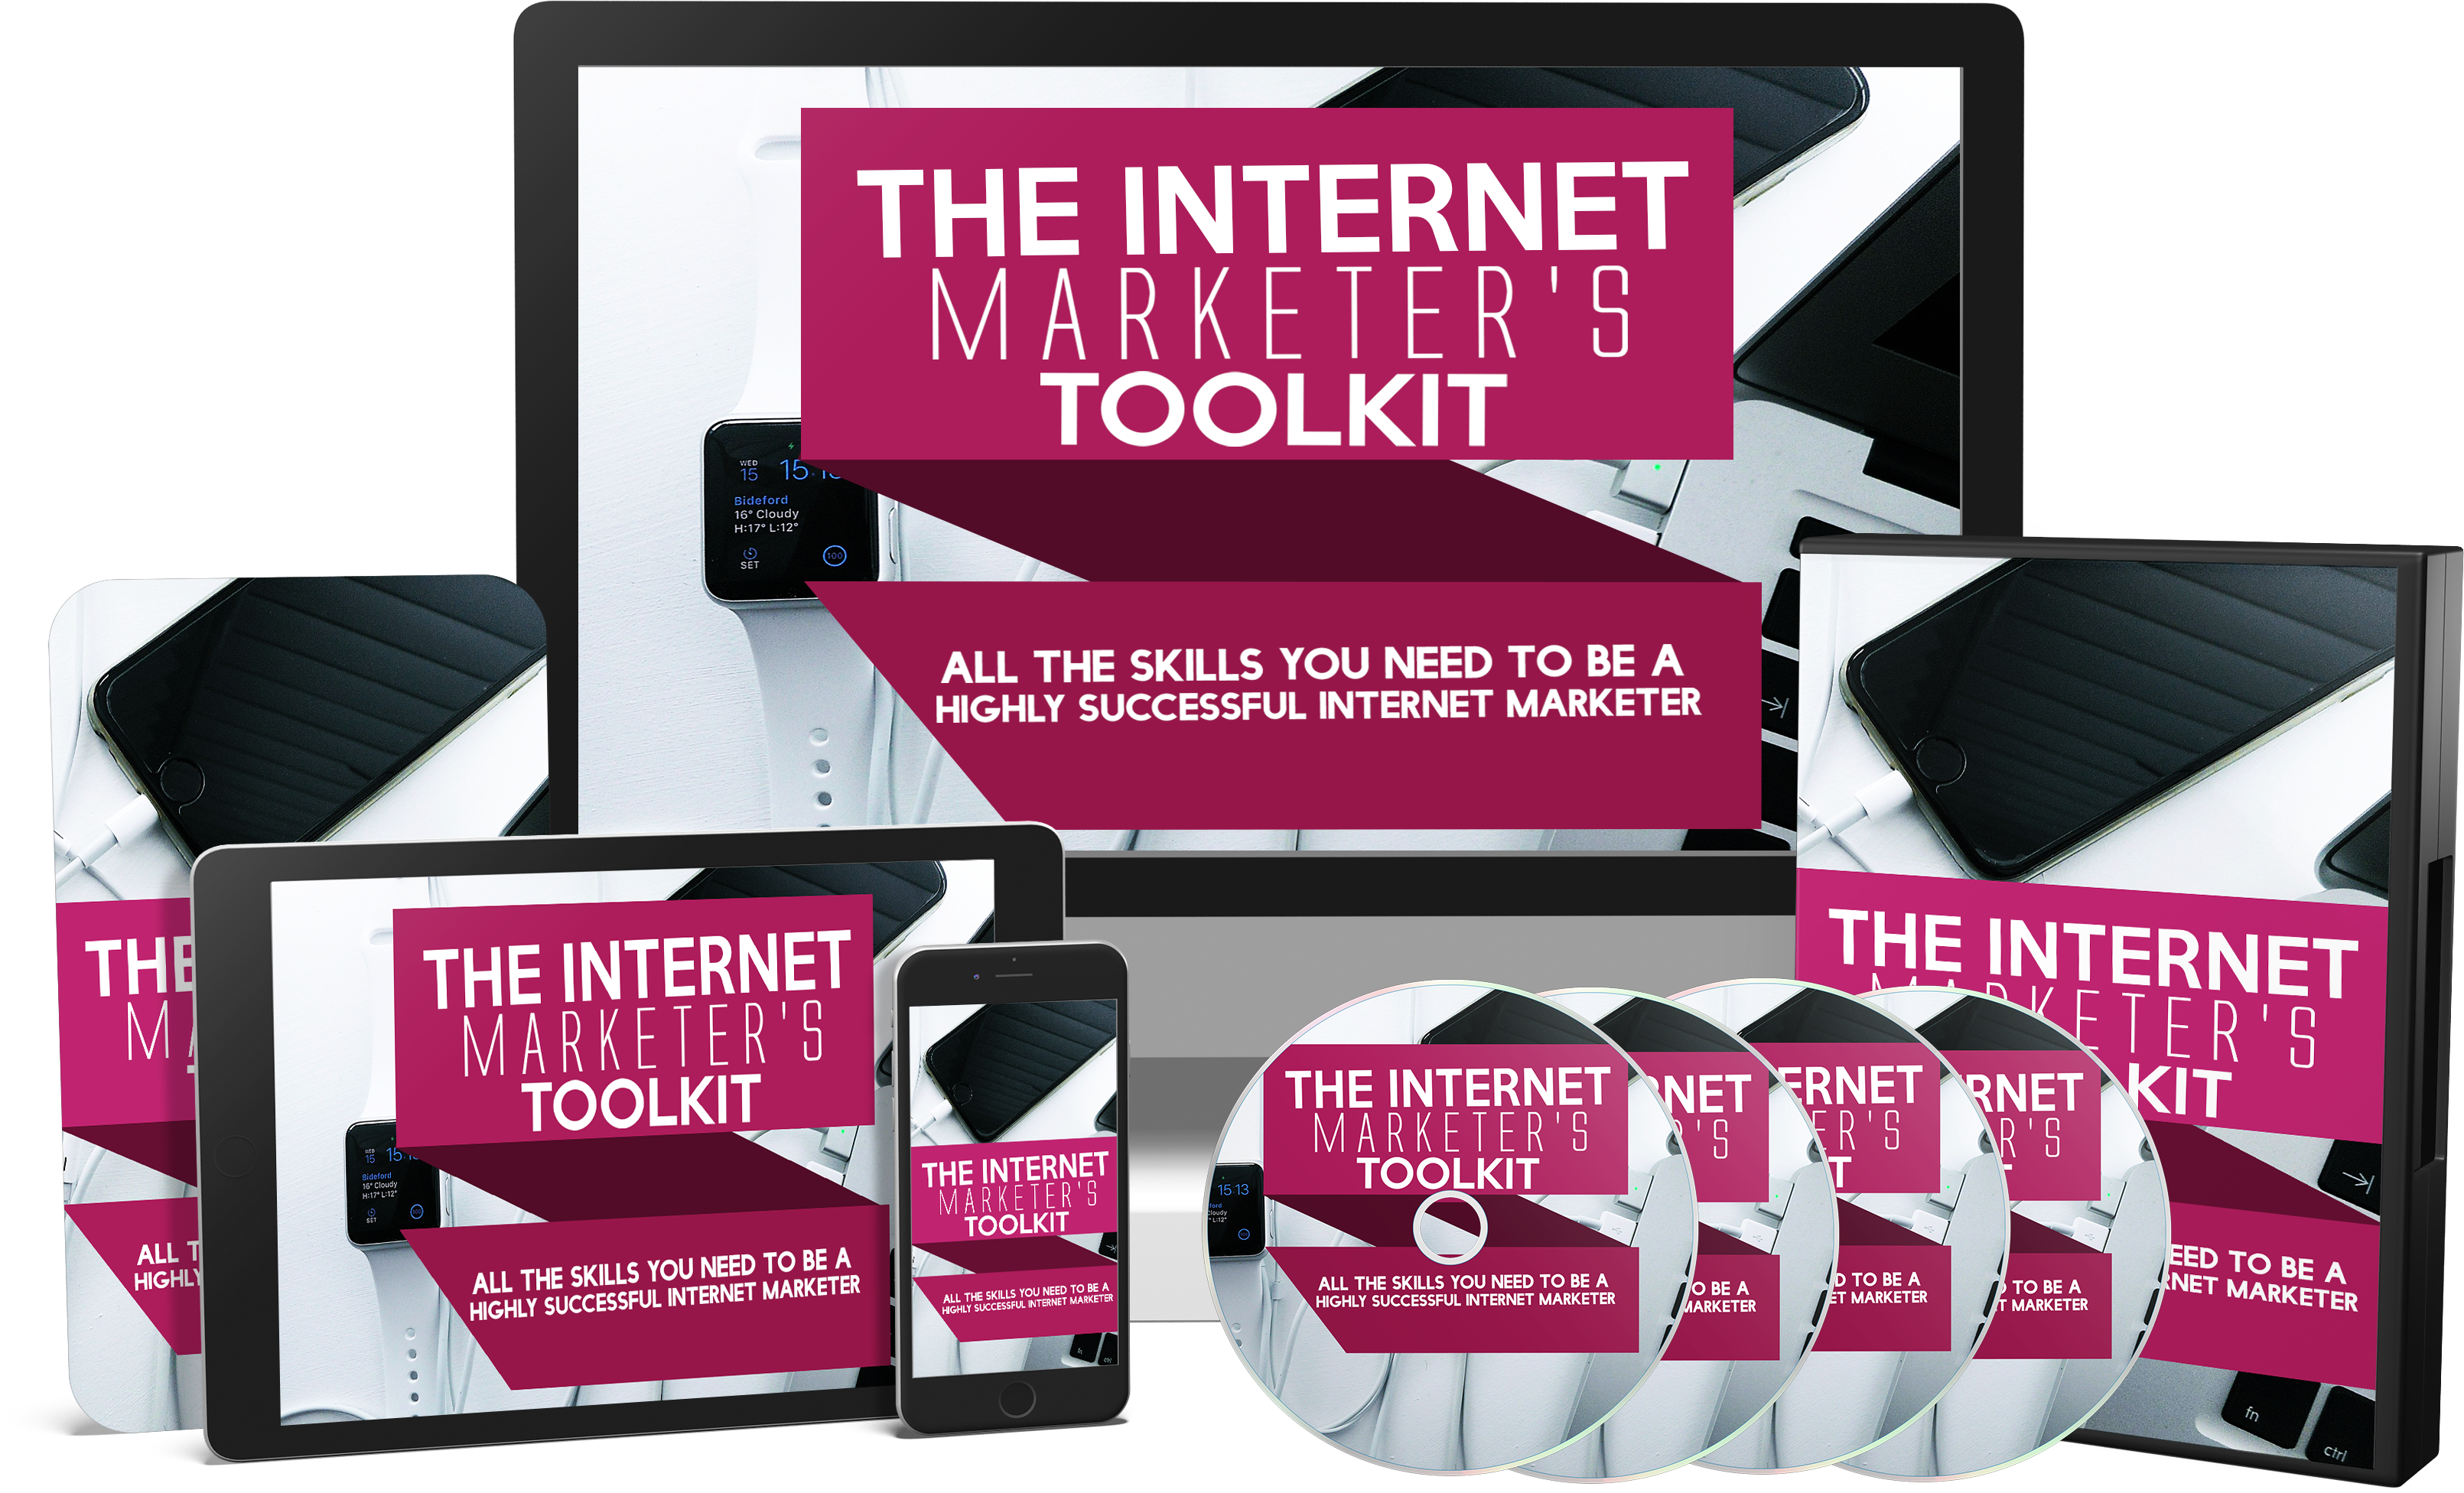 SIM - THE INTERNET MARKETER'S TOOLKIT E-Guide bundle